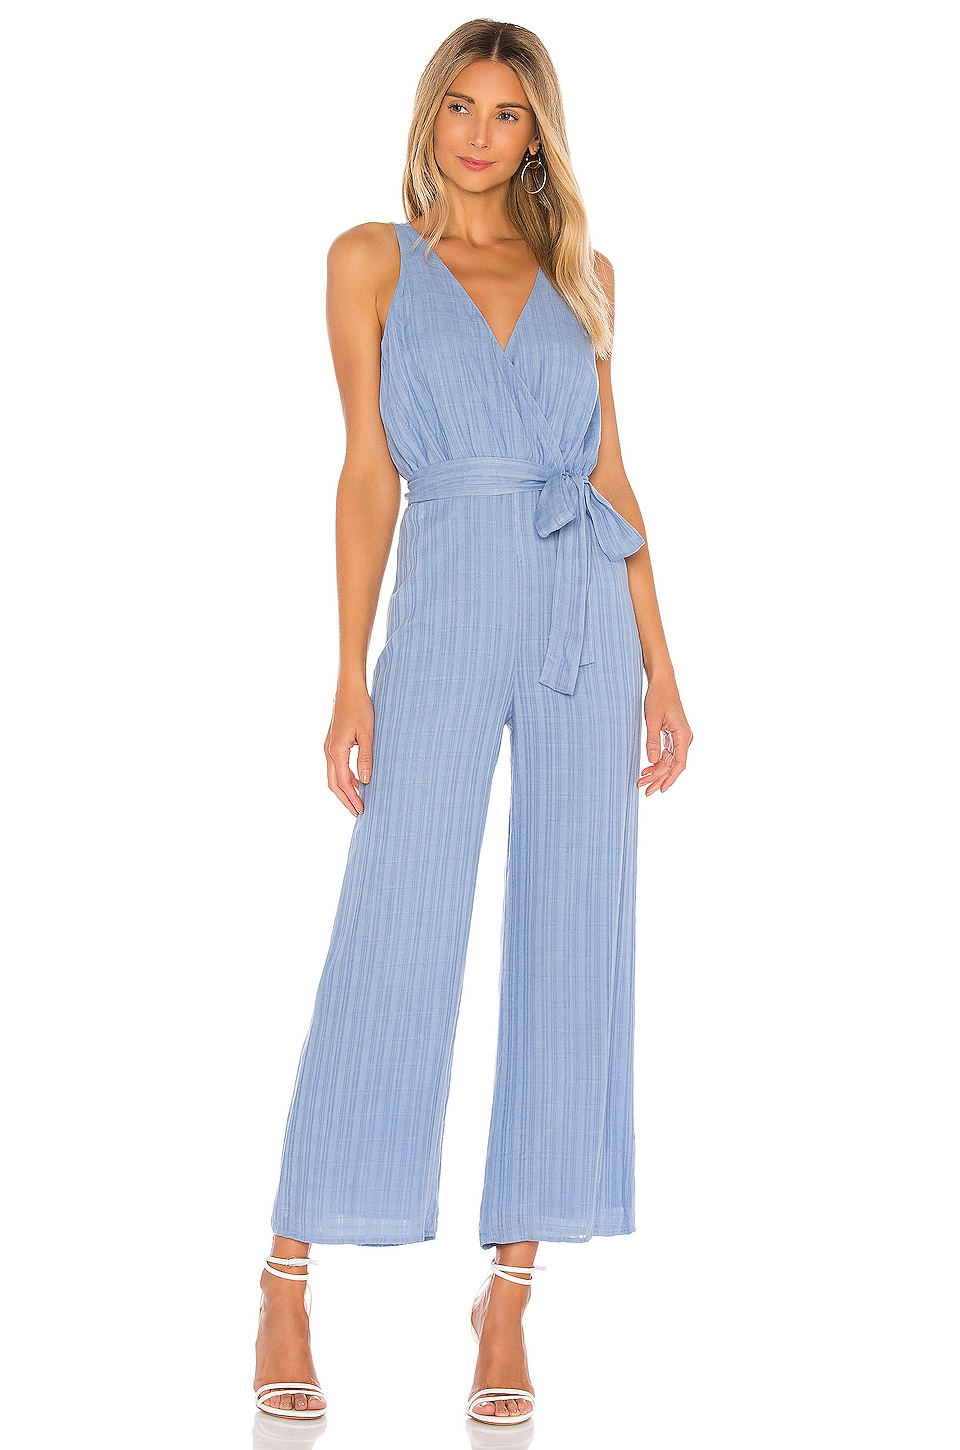 Privacy Please Cardiff Jumpsuit in Periwinkle Blue | REVOLVE